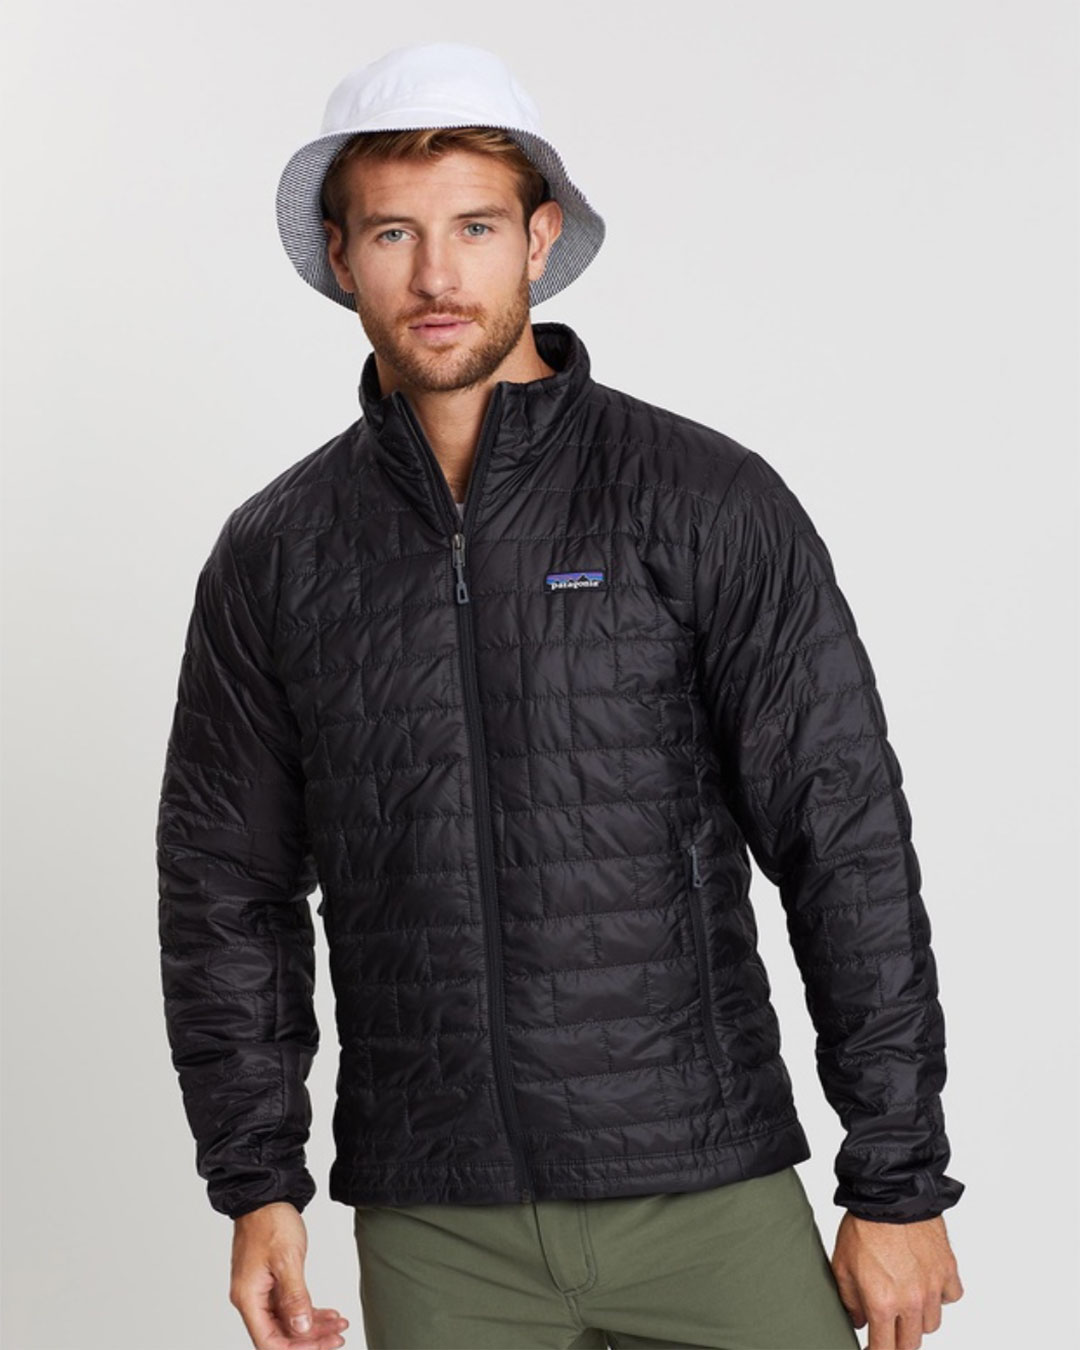 A man wearing a black Patagonia puff jacket with a white bucket hat.